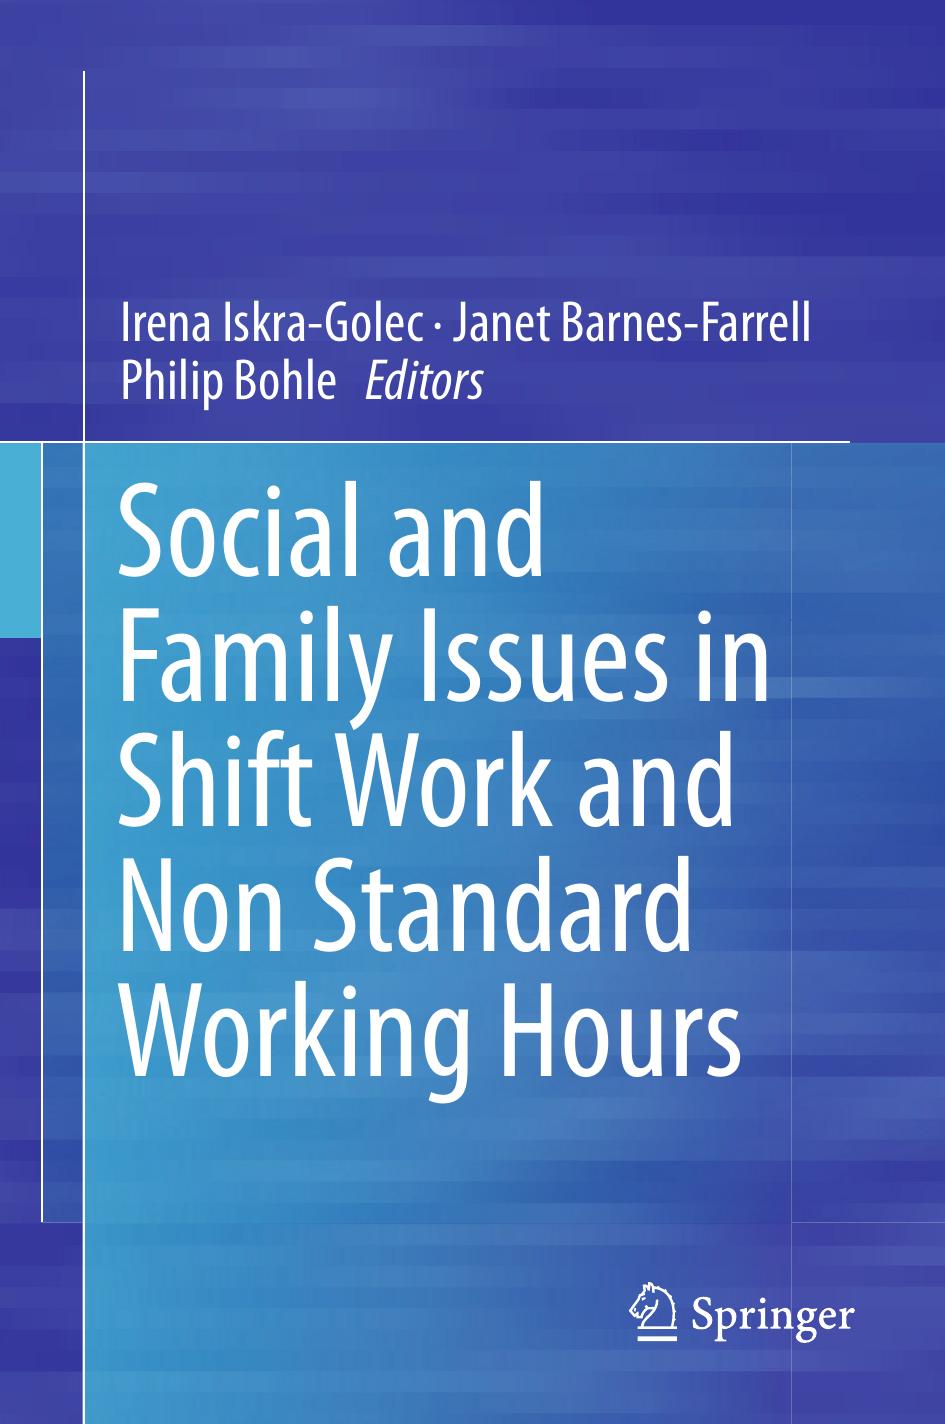 Social and Family Issues in Shift Work and Non Standard Working Hours 2016